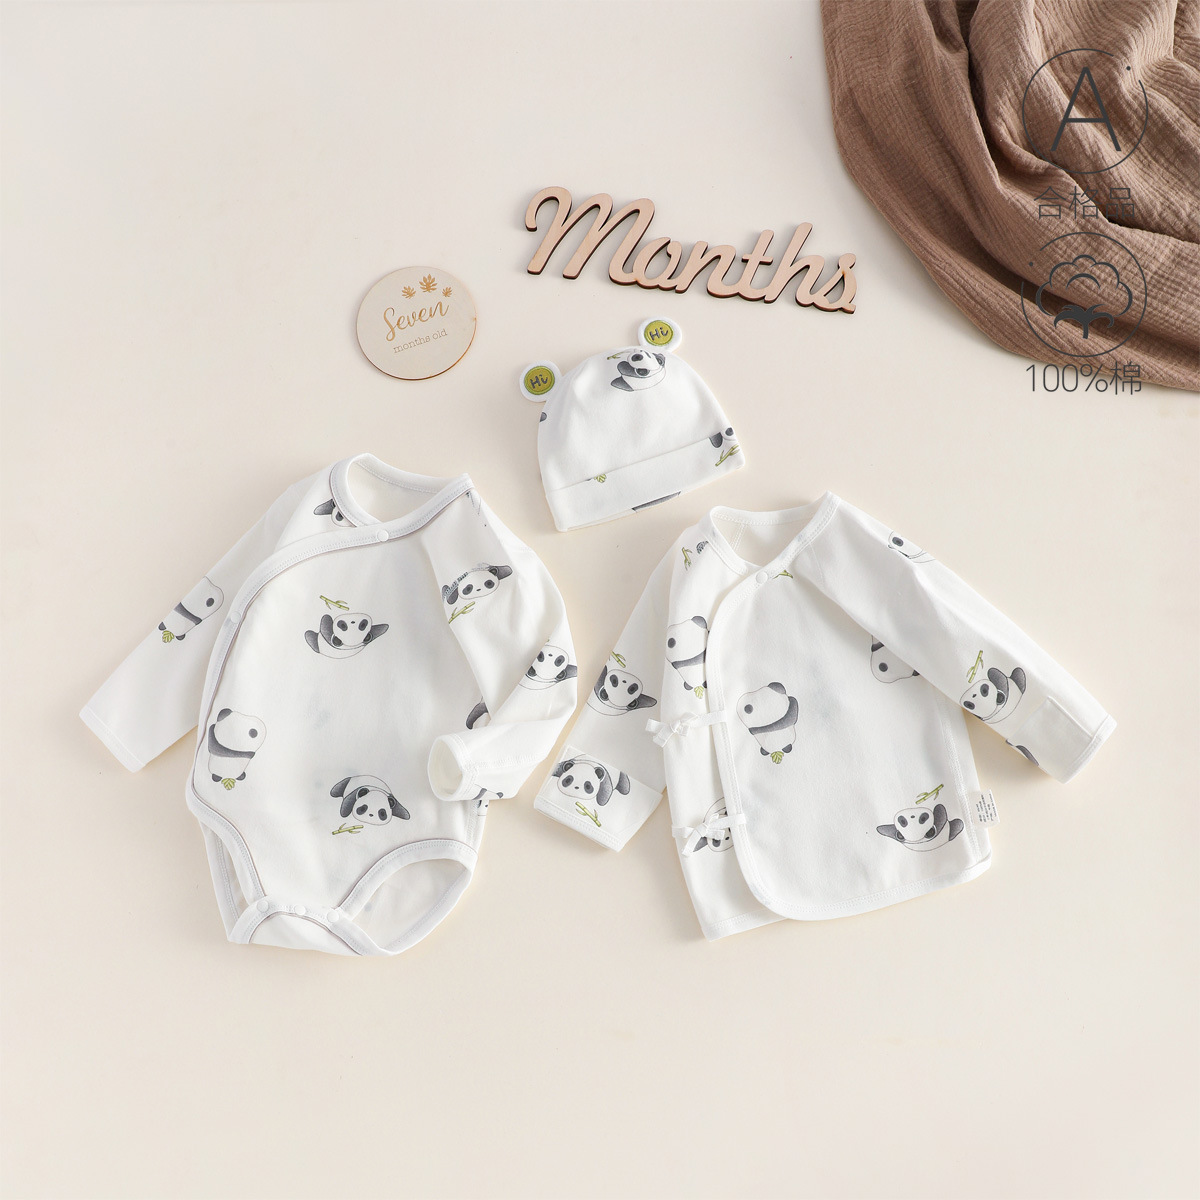 Baby New Four Seasons jumpsuit with cotton Anyang baby and children's clothing, baby crawling clothes, long sleeved warm underwear, boneless jumpsuit